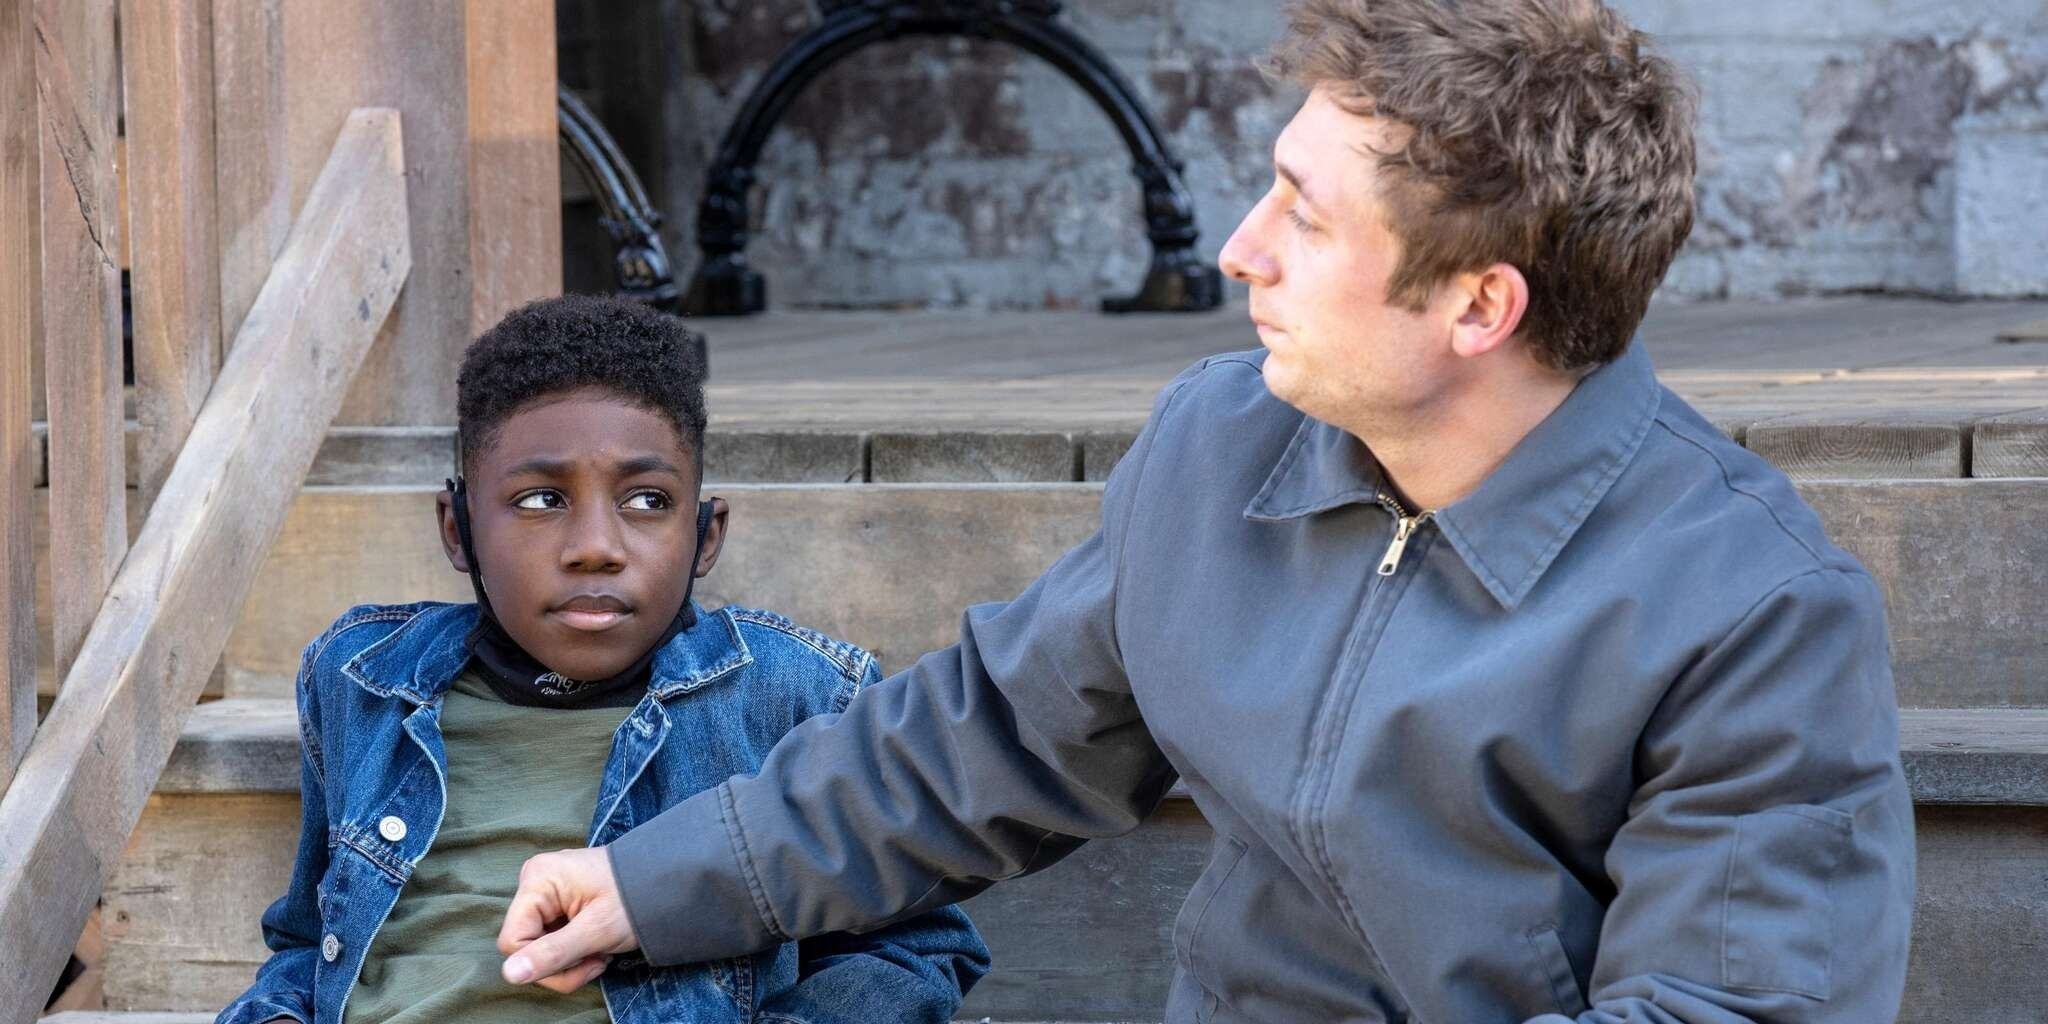 Lip and Liam talk on a doorstep in Shameless